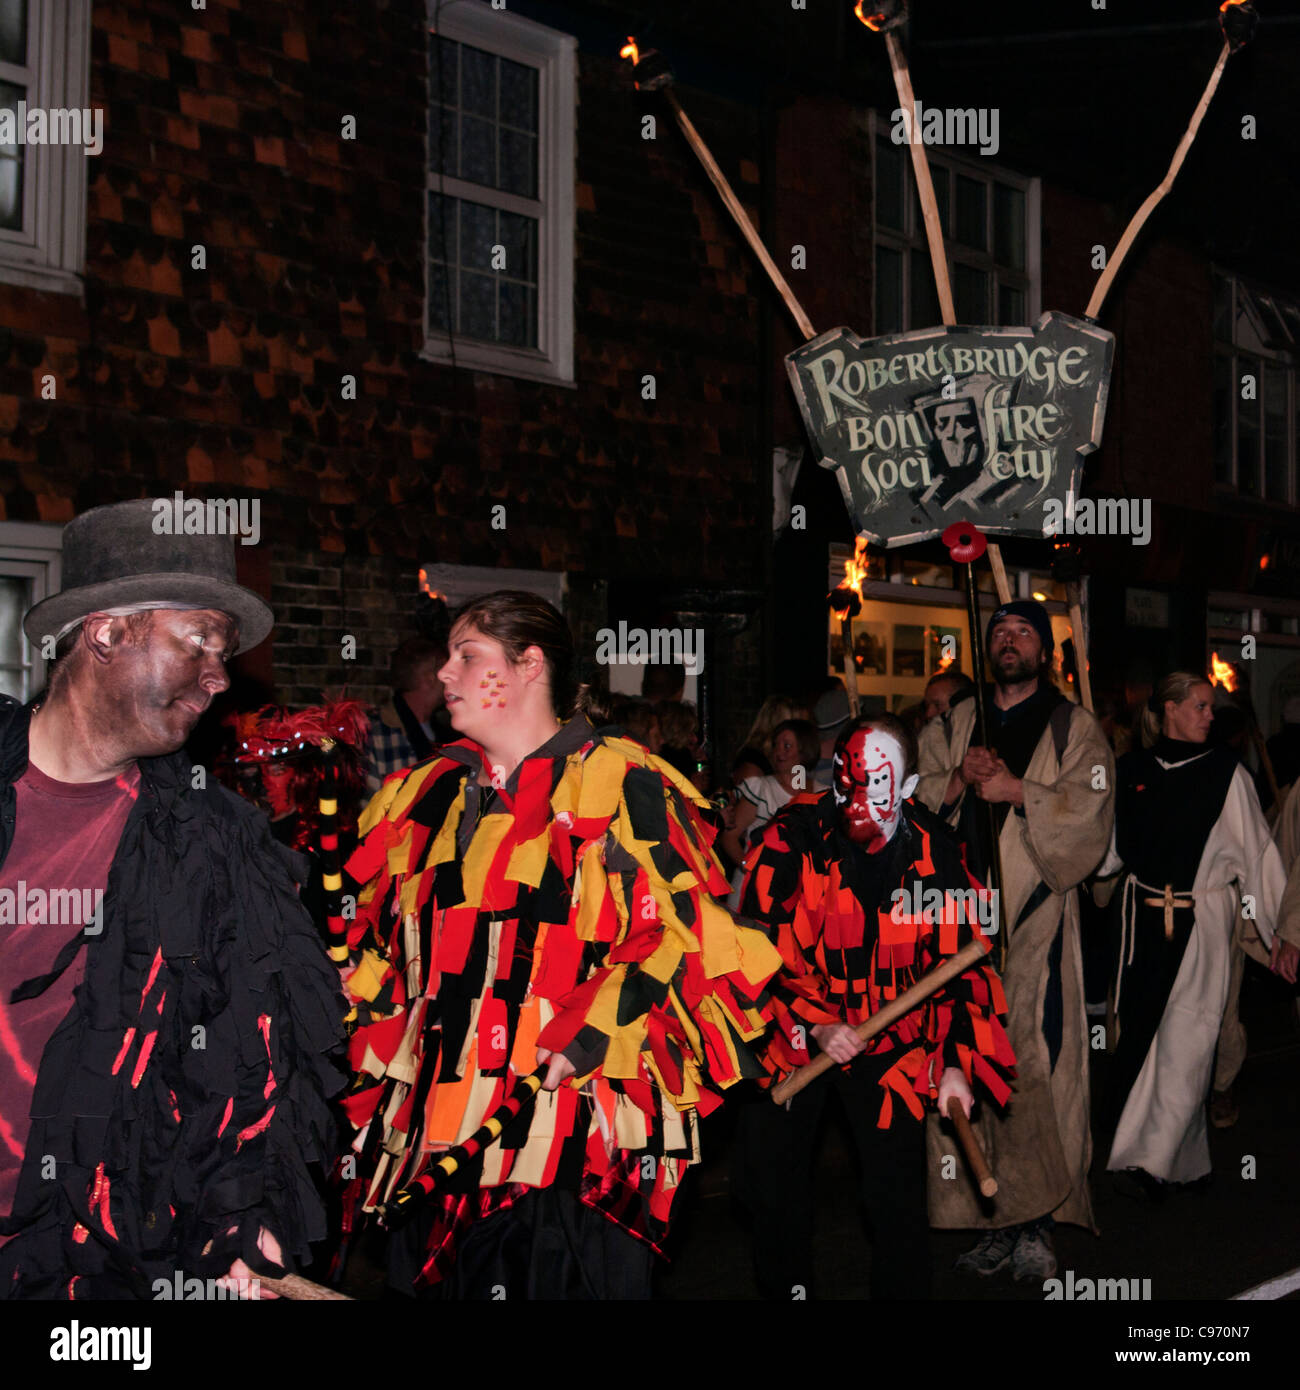 Robertsbridge Bonfire Society Banner Lewes Being Carried During The Rye Bonfire Society Street Parade East Sussex England Stock Photo